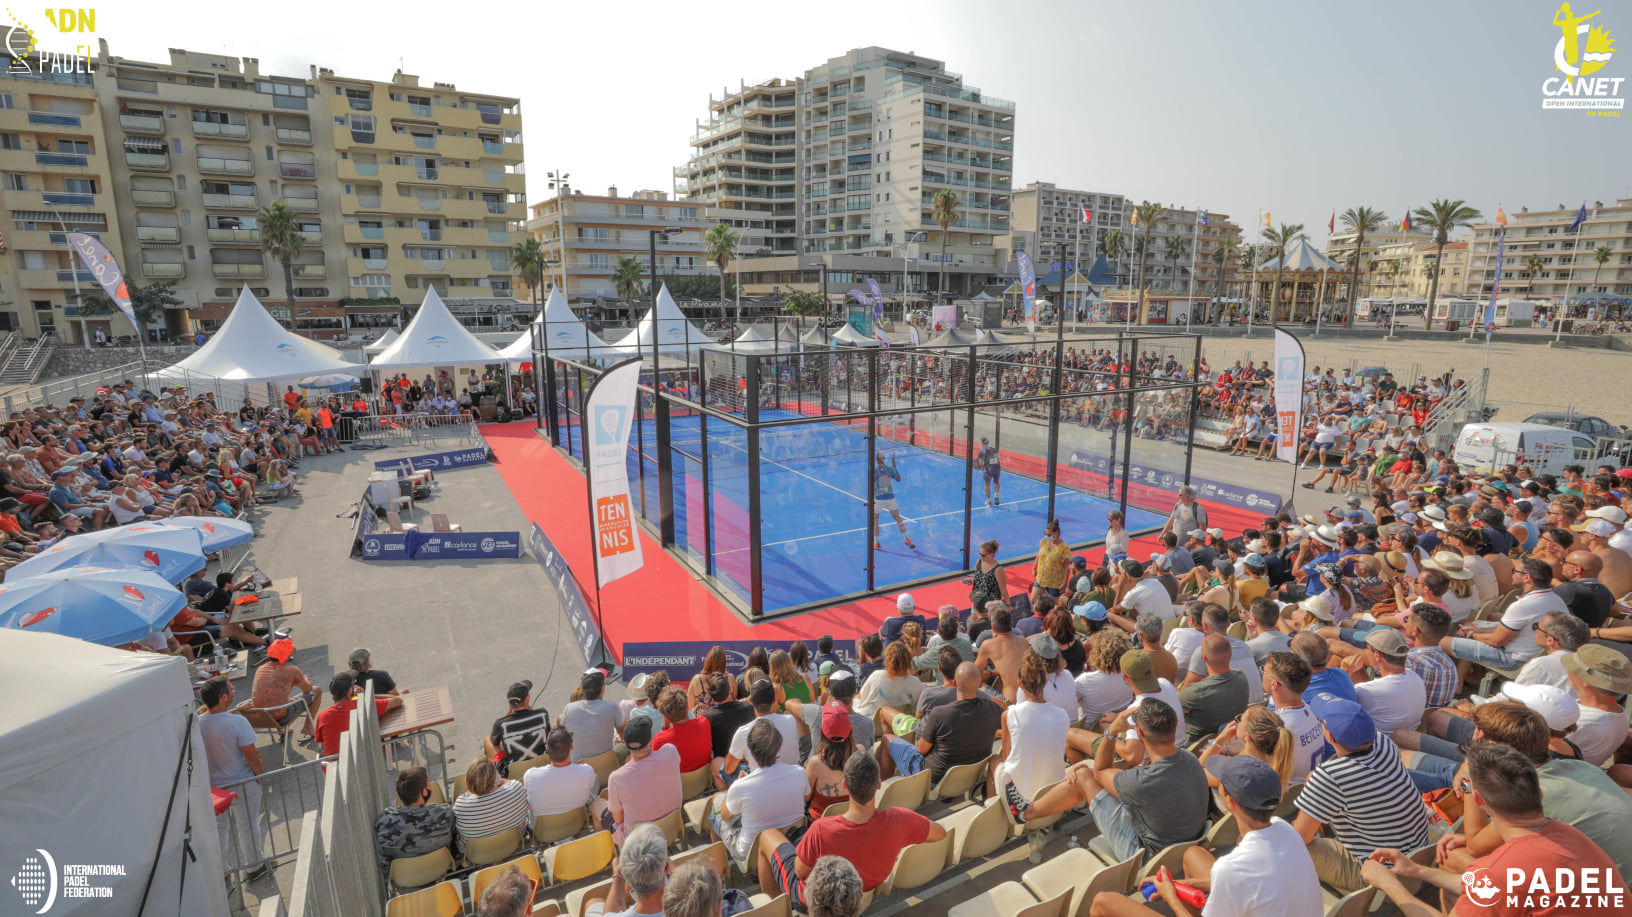 FIP RISE CANET: the tournament of all records